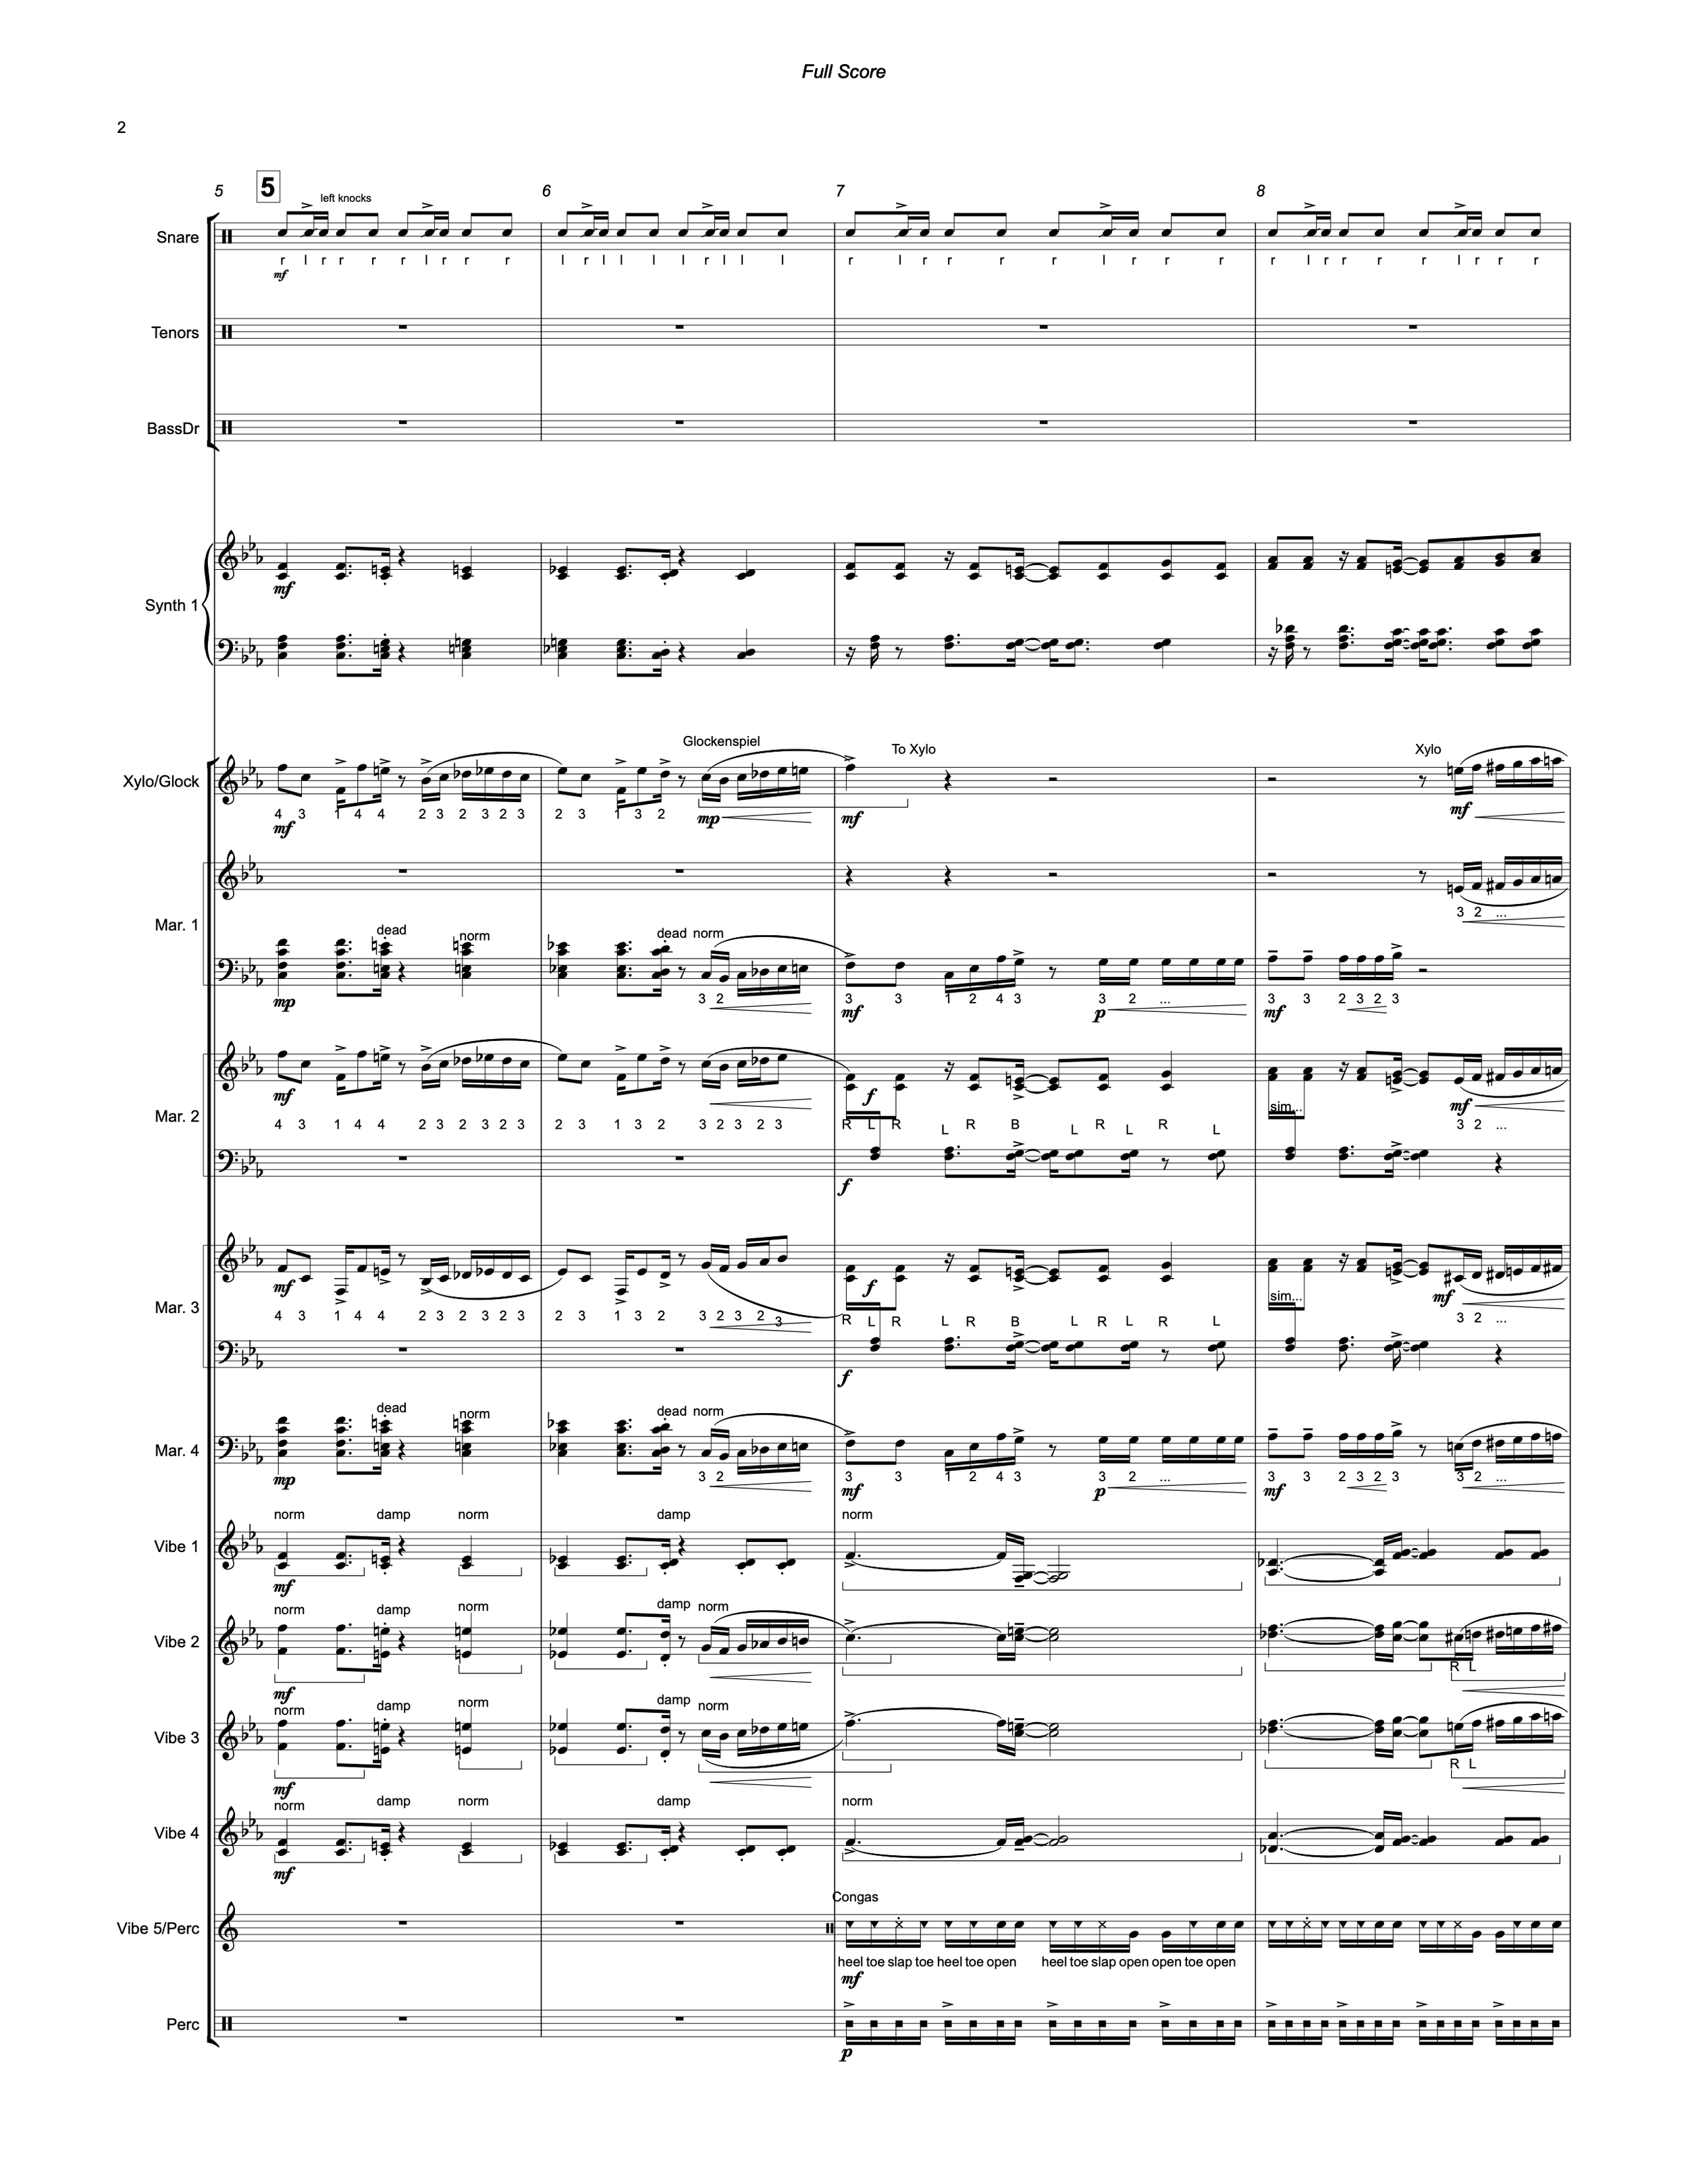 Danzas_v2.5 Percussion Score (updated samples).png